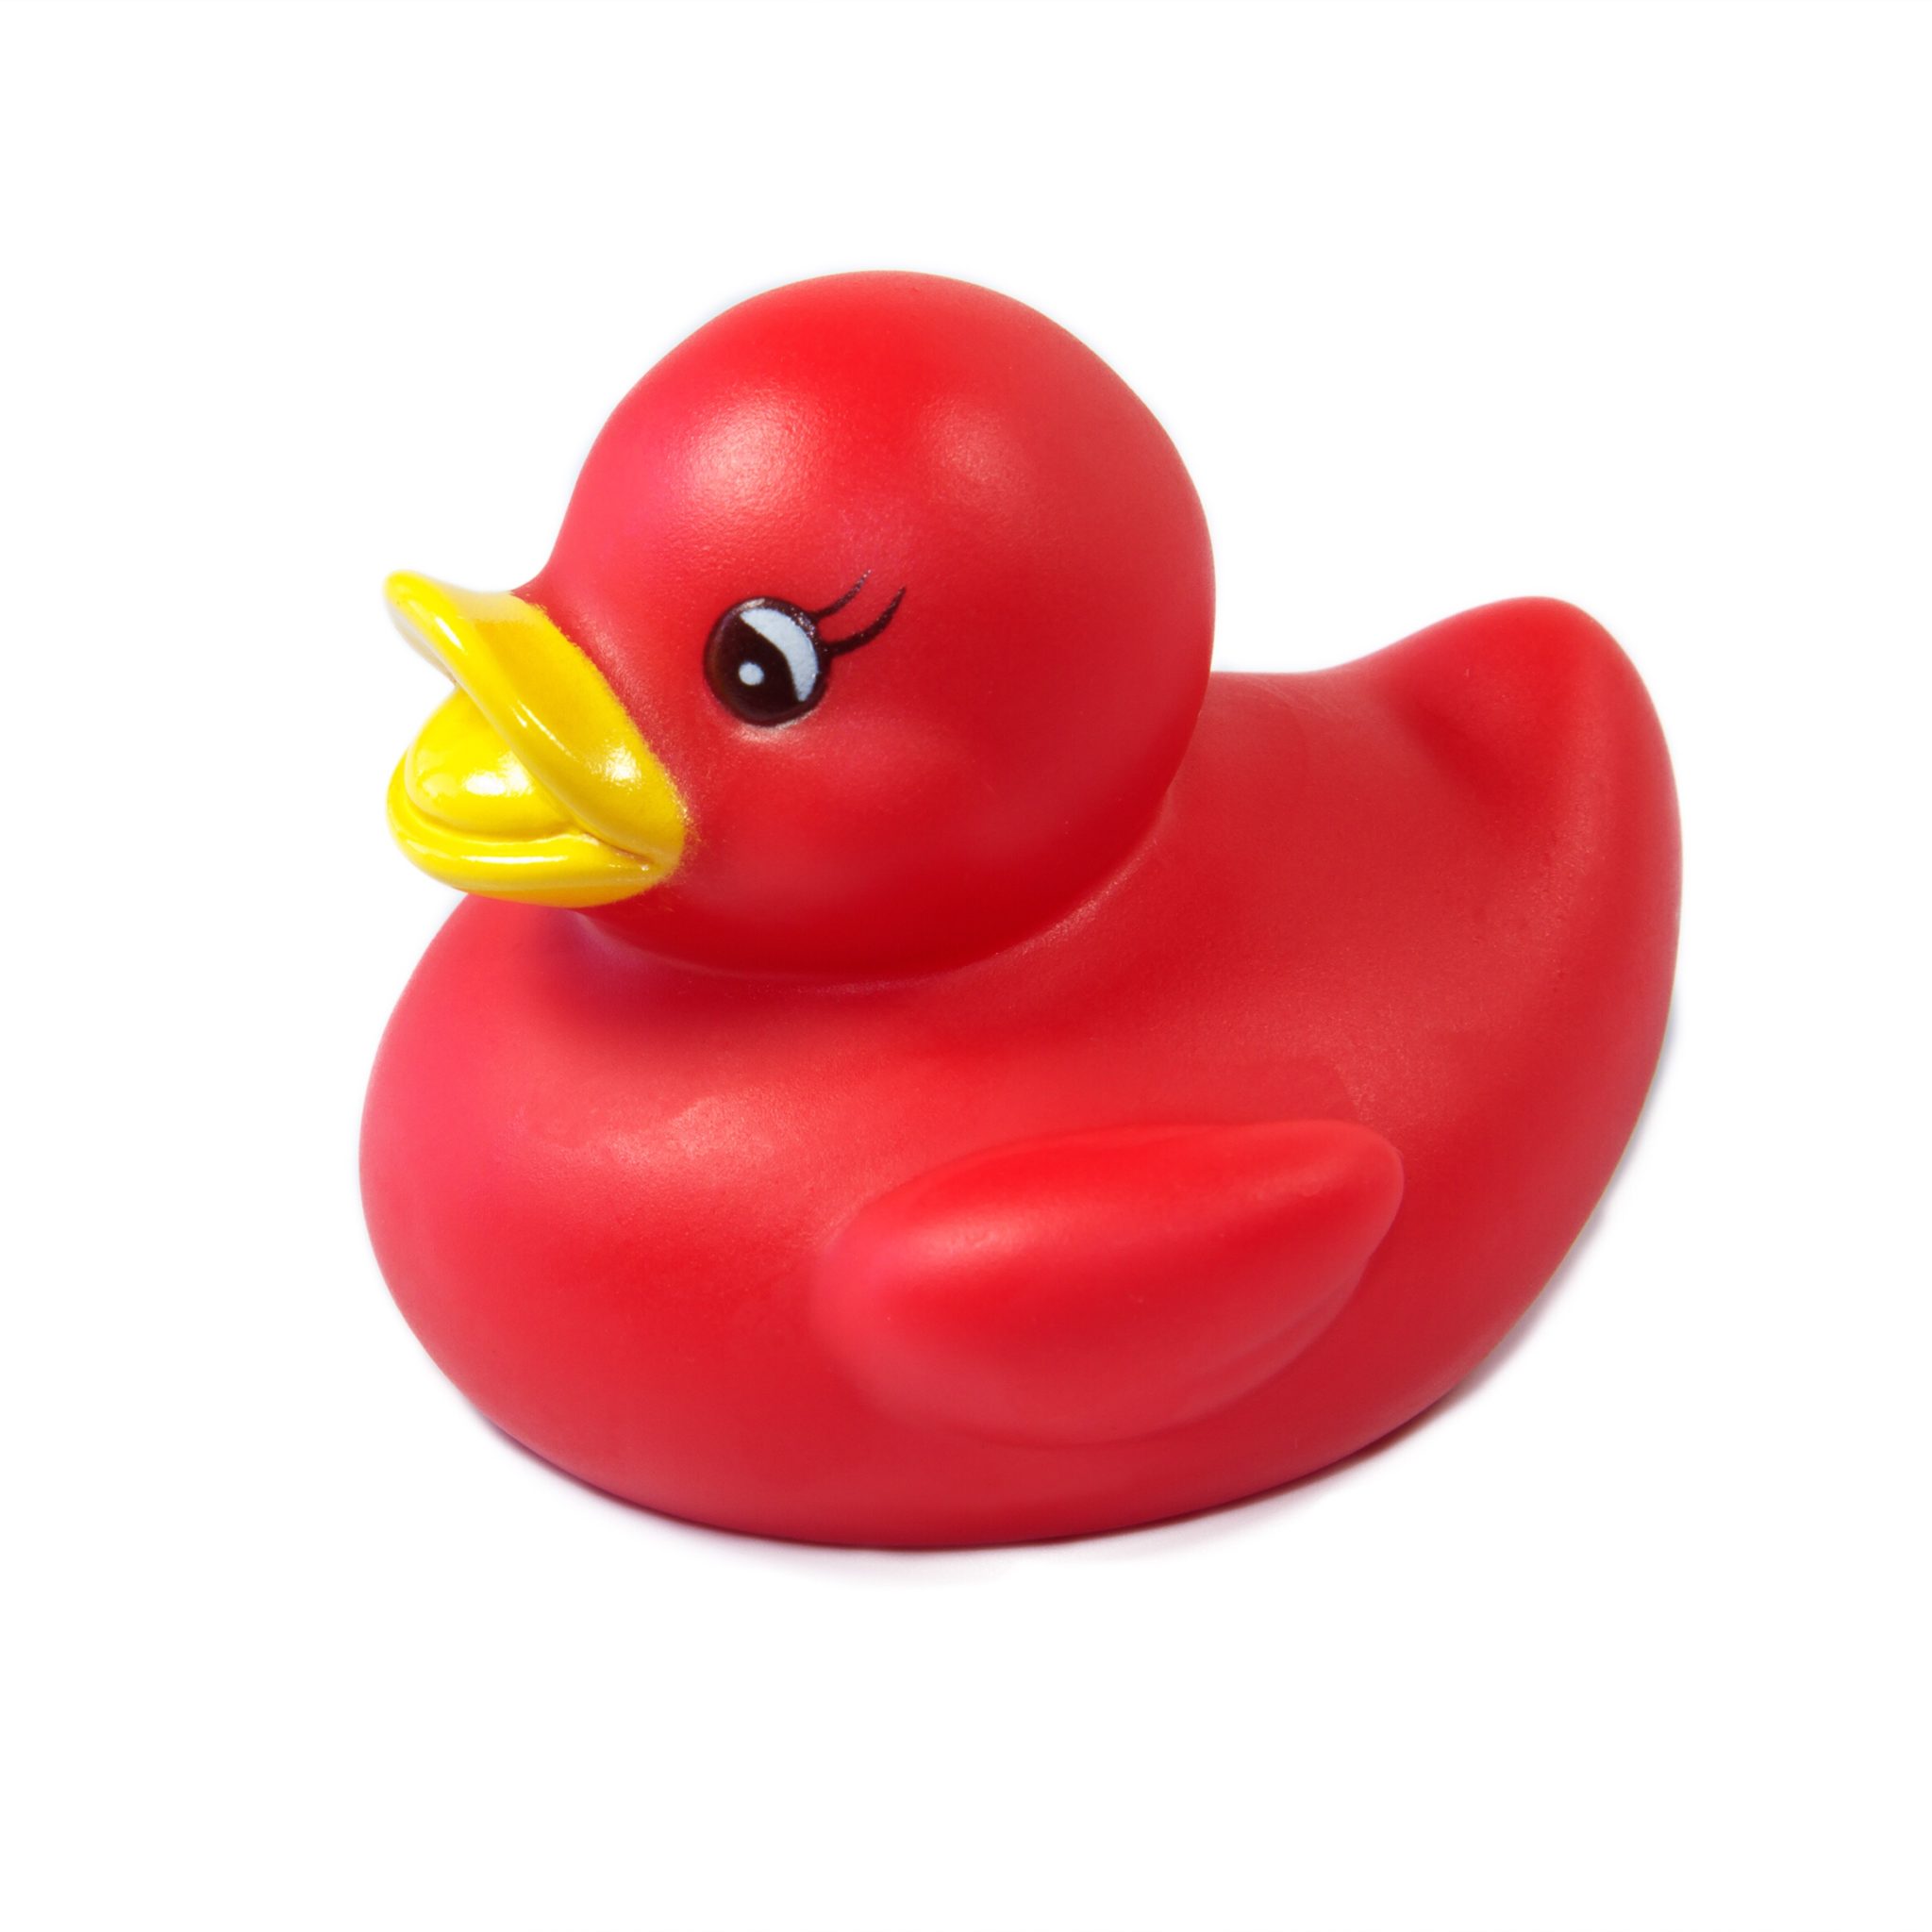 Red rubber ducky.